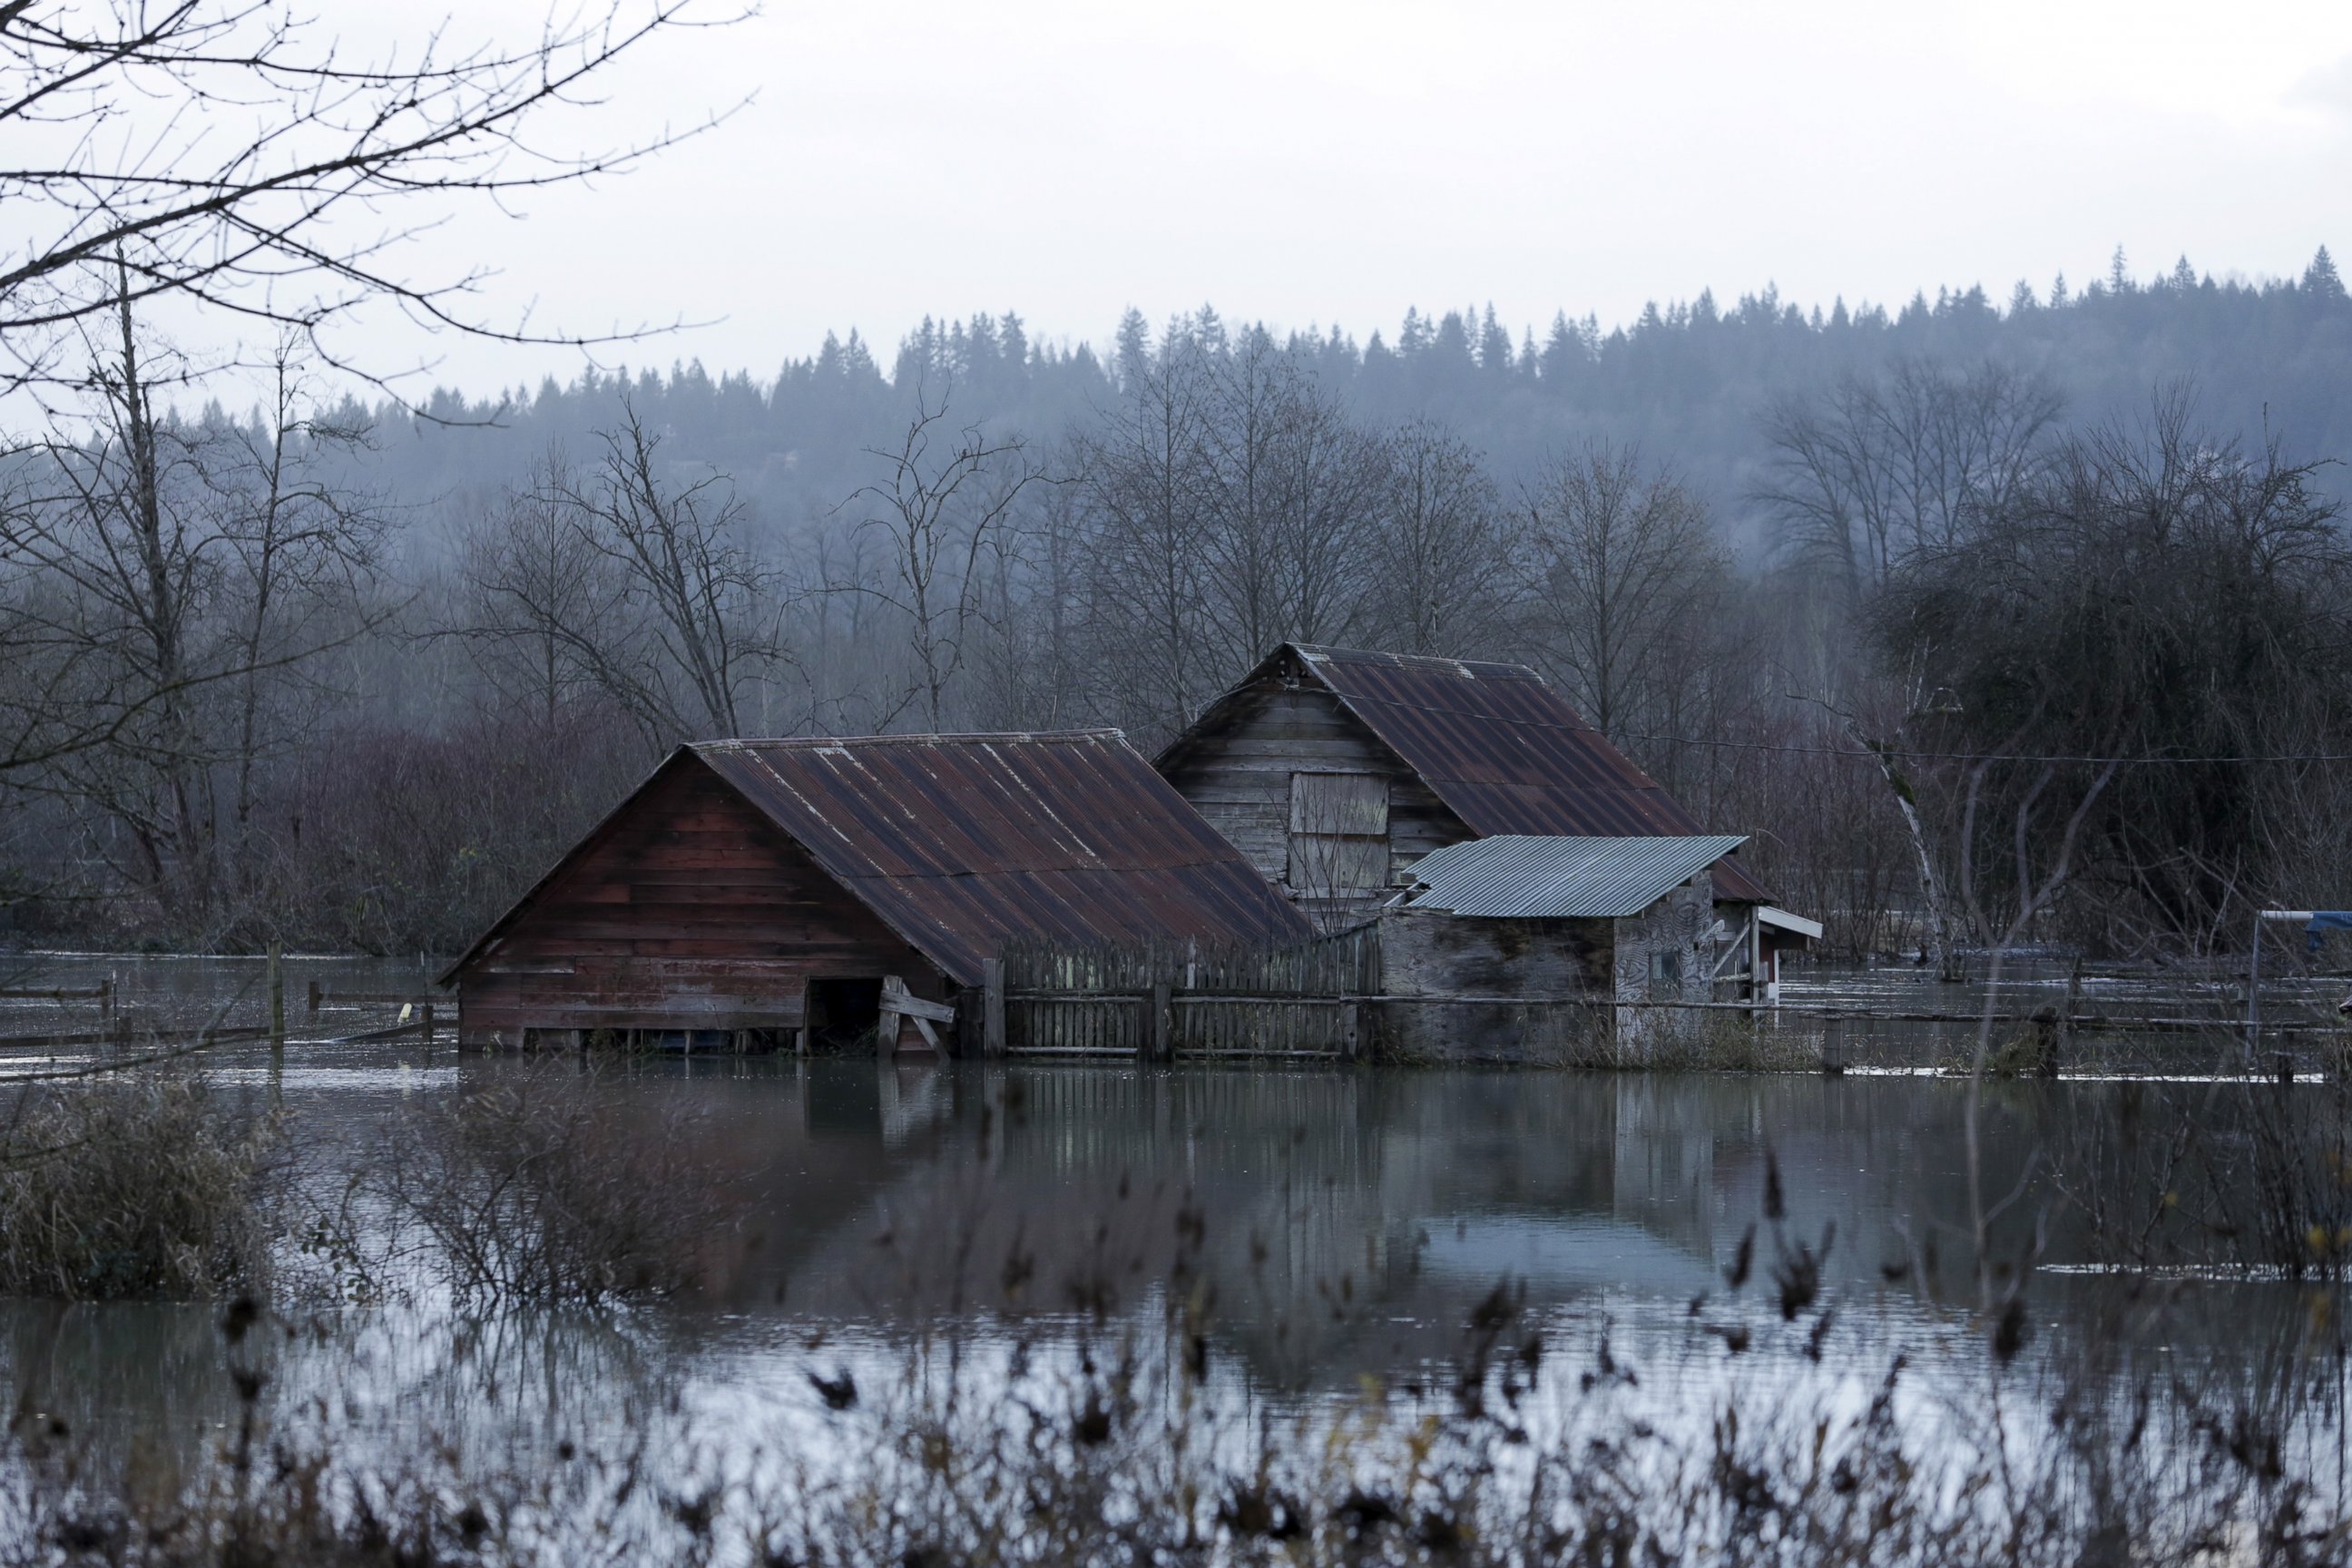 PHOTO:Flood waters of the Snoqualmie River surround a structure off State Route 203 during a storm in Carnation, Wash., Dec. 9, 2015.  